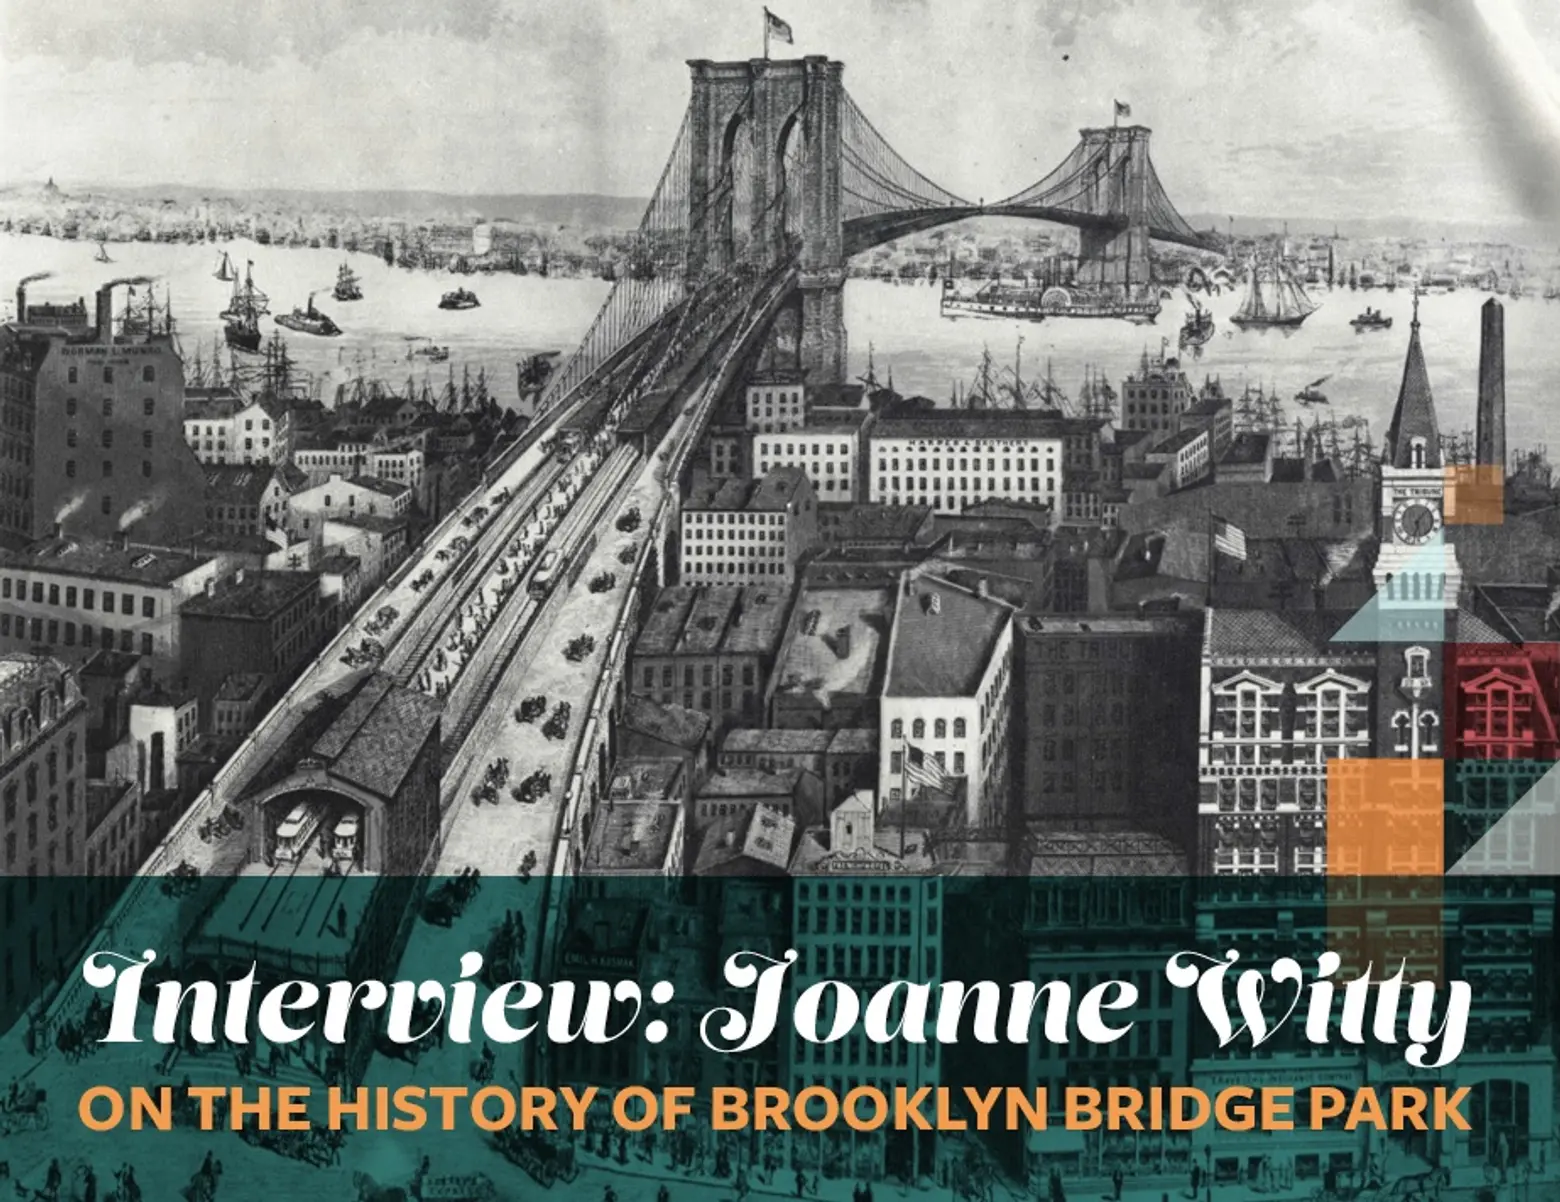 From shipping hub to waterfront wonder, the history of Brooklyn Bridge Park with Joanne Witty